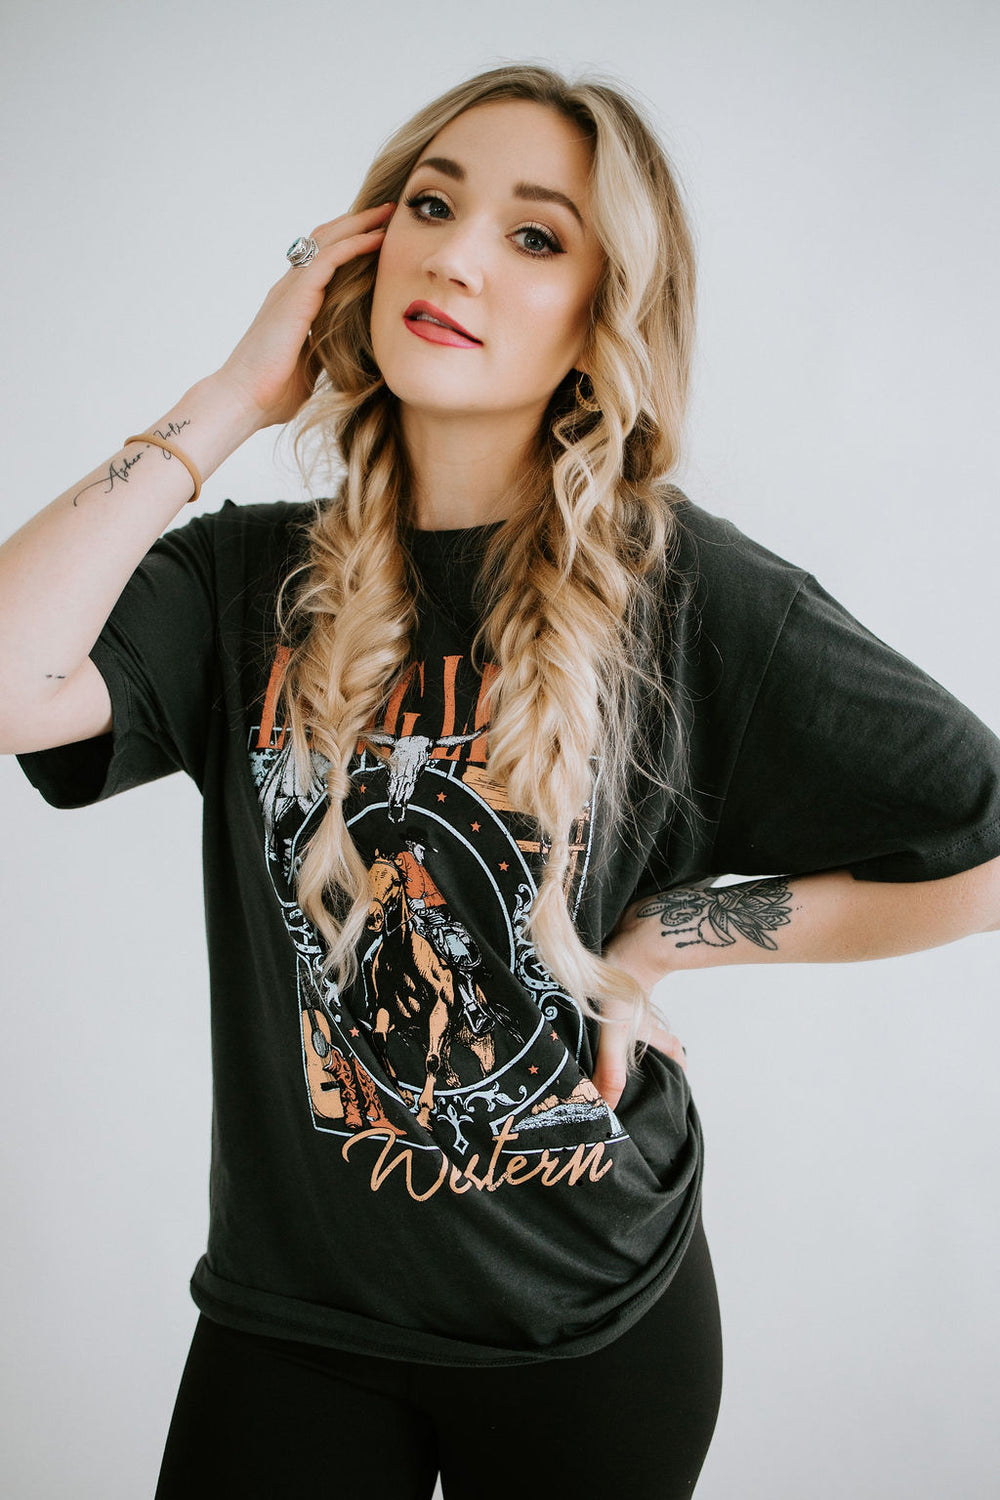 Long Live Western Graphic Tee